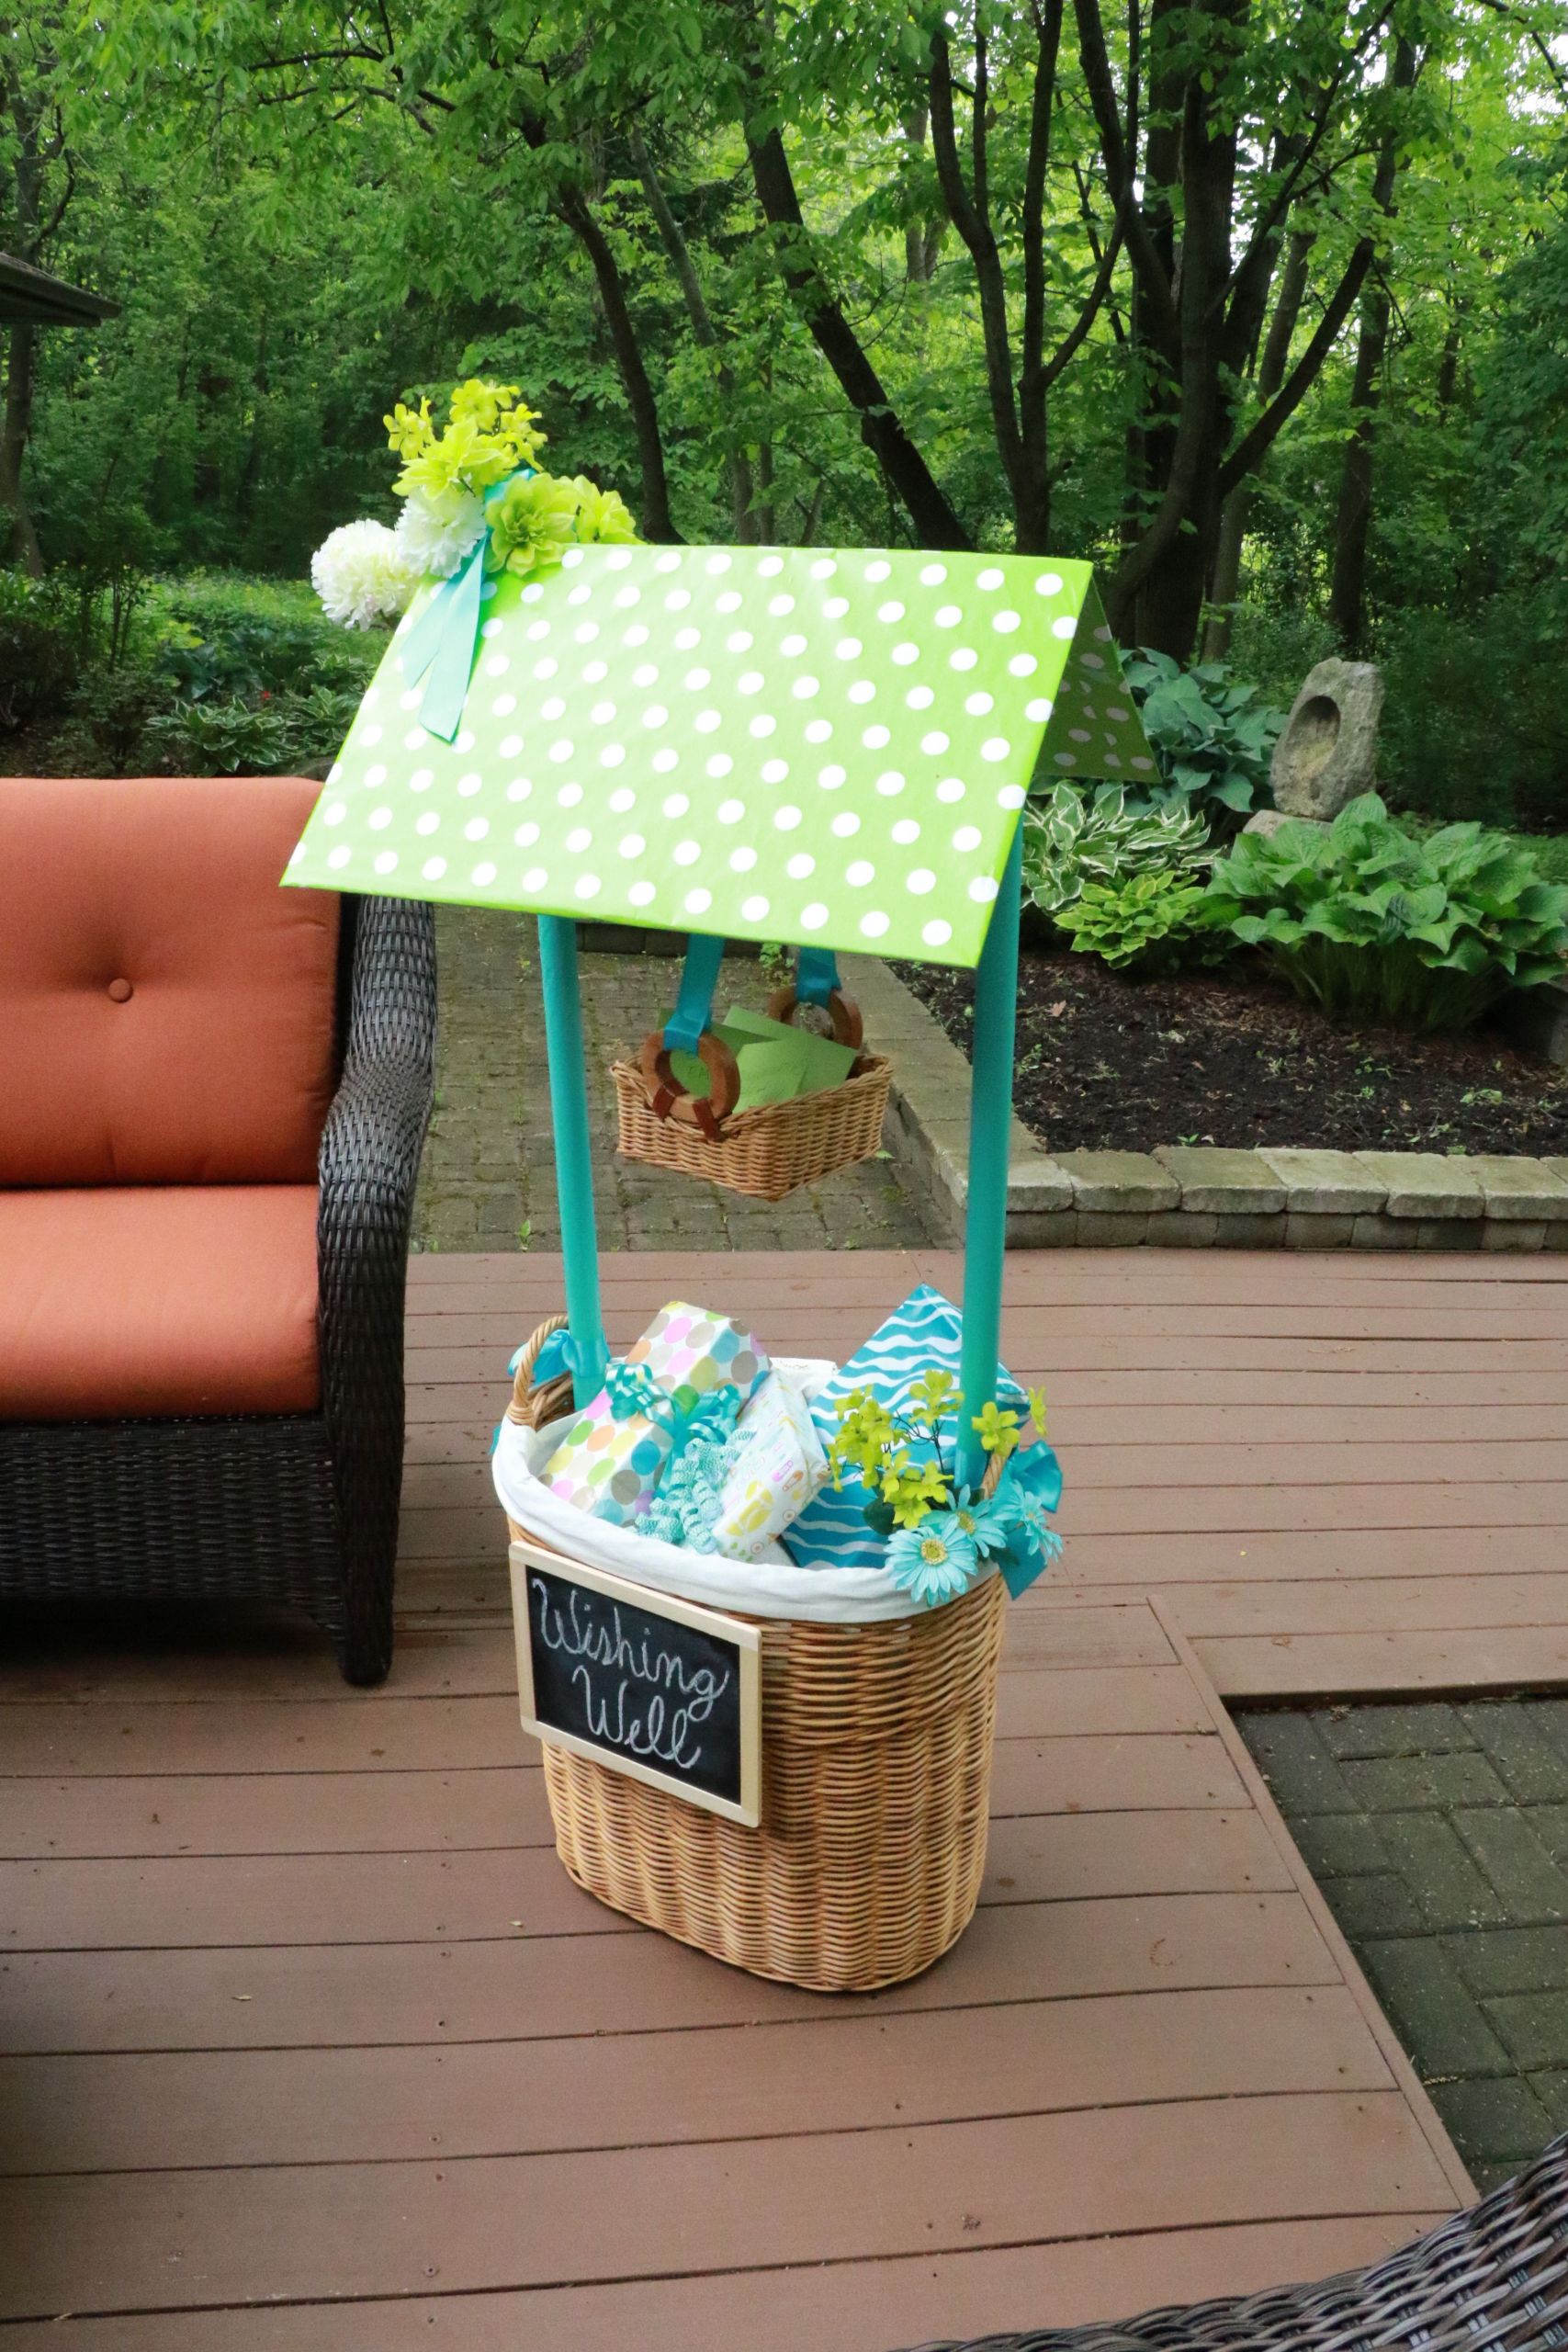 Baby Shower Wishing Well Gift Ideas
 How To Make Your Own Beautiful Wishing Well Basket For A